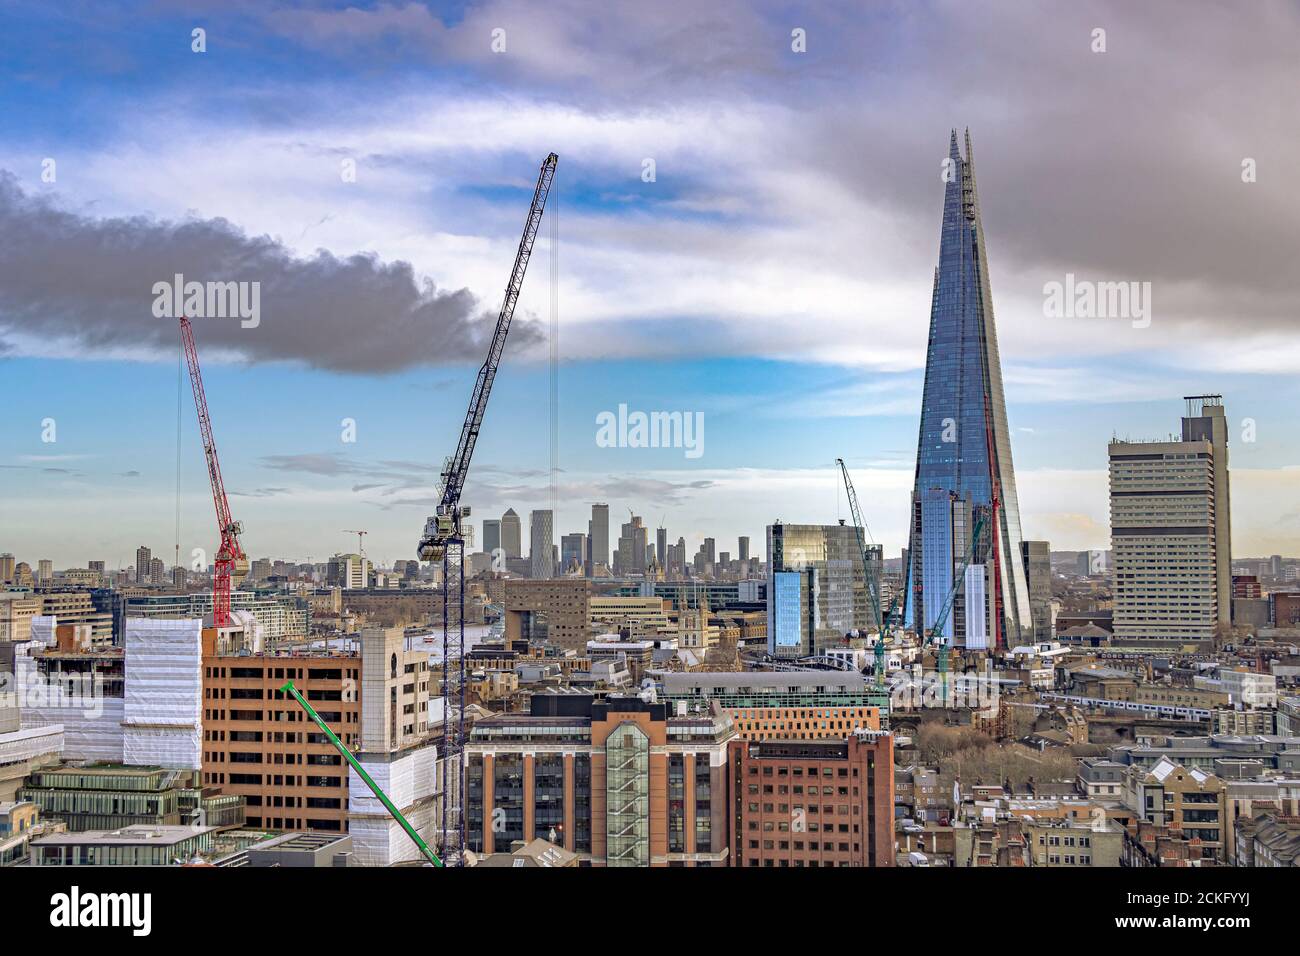 A view over part of The London Borough Of Southwark with The Shard and Guy's Hospital side by side, London, UK Stock Photo